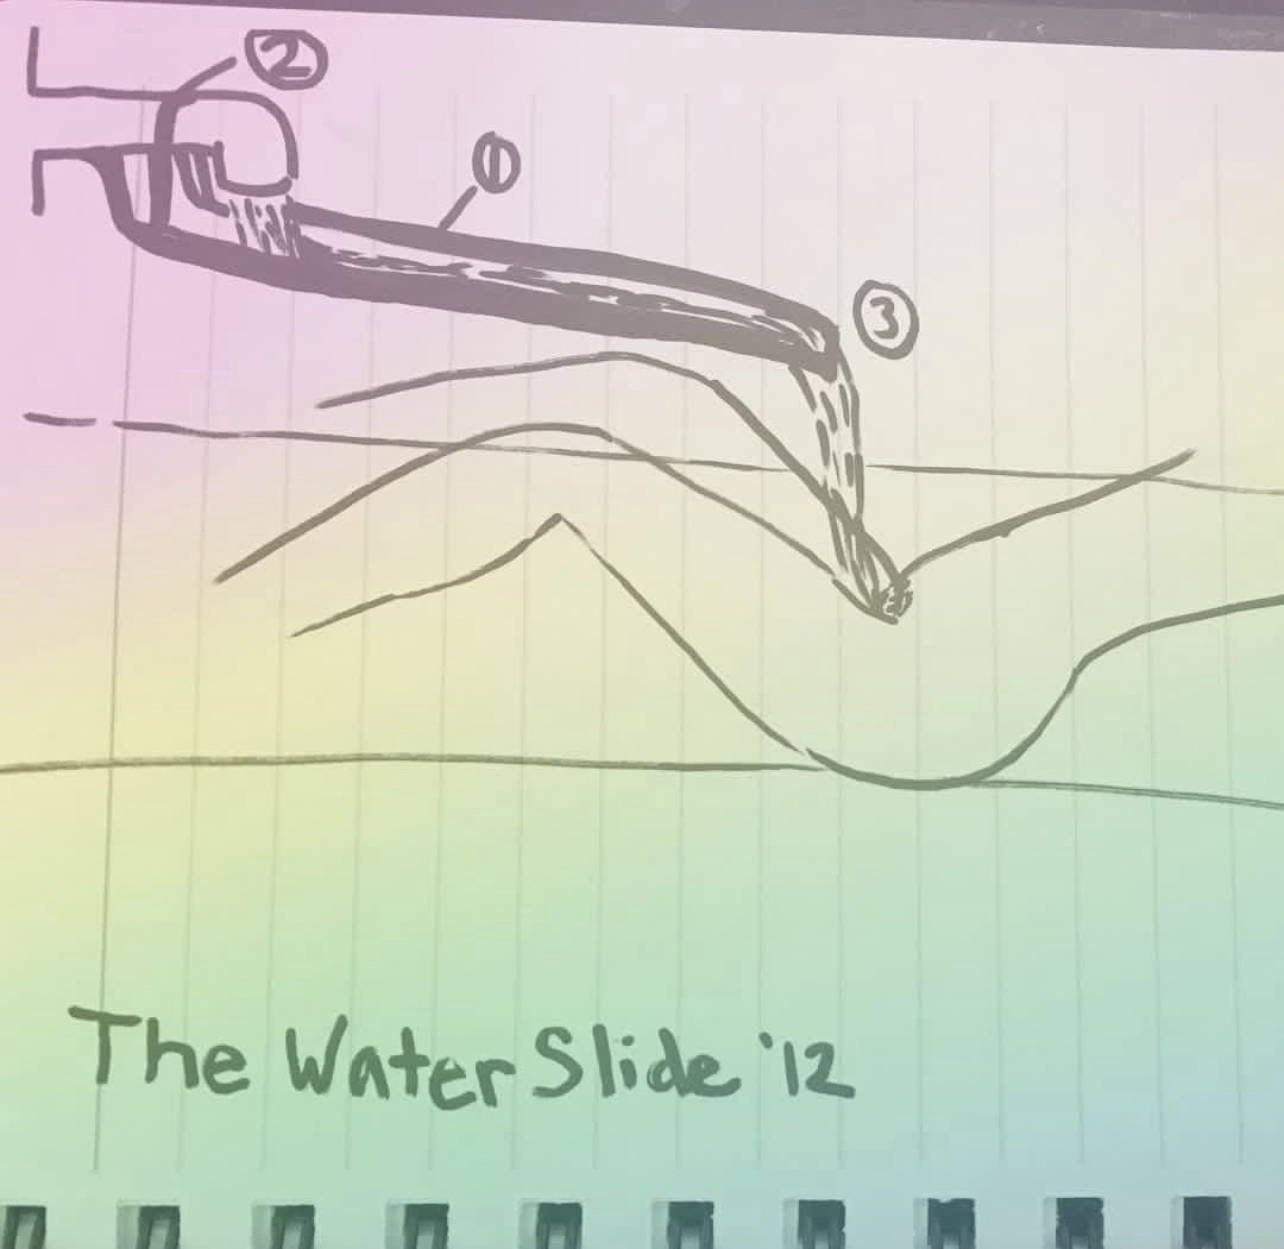 2012 hand drawing of The WaterSlyde 